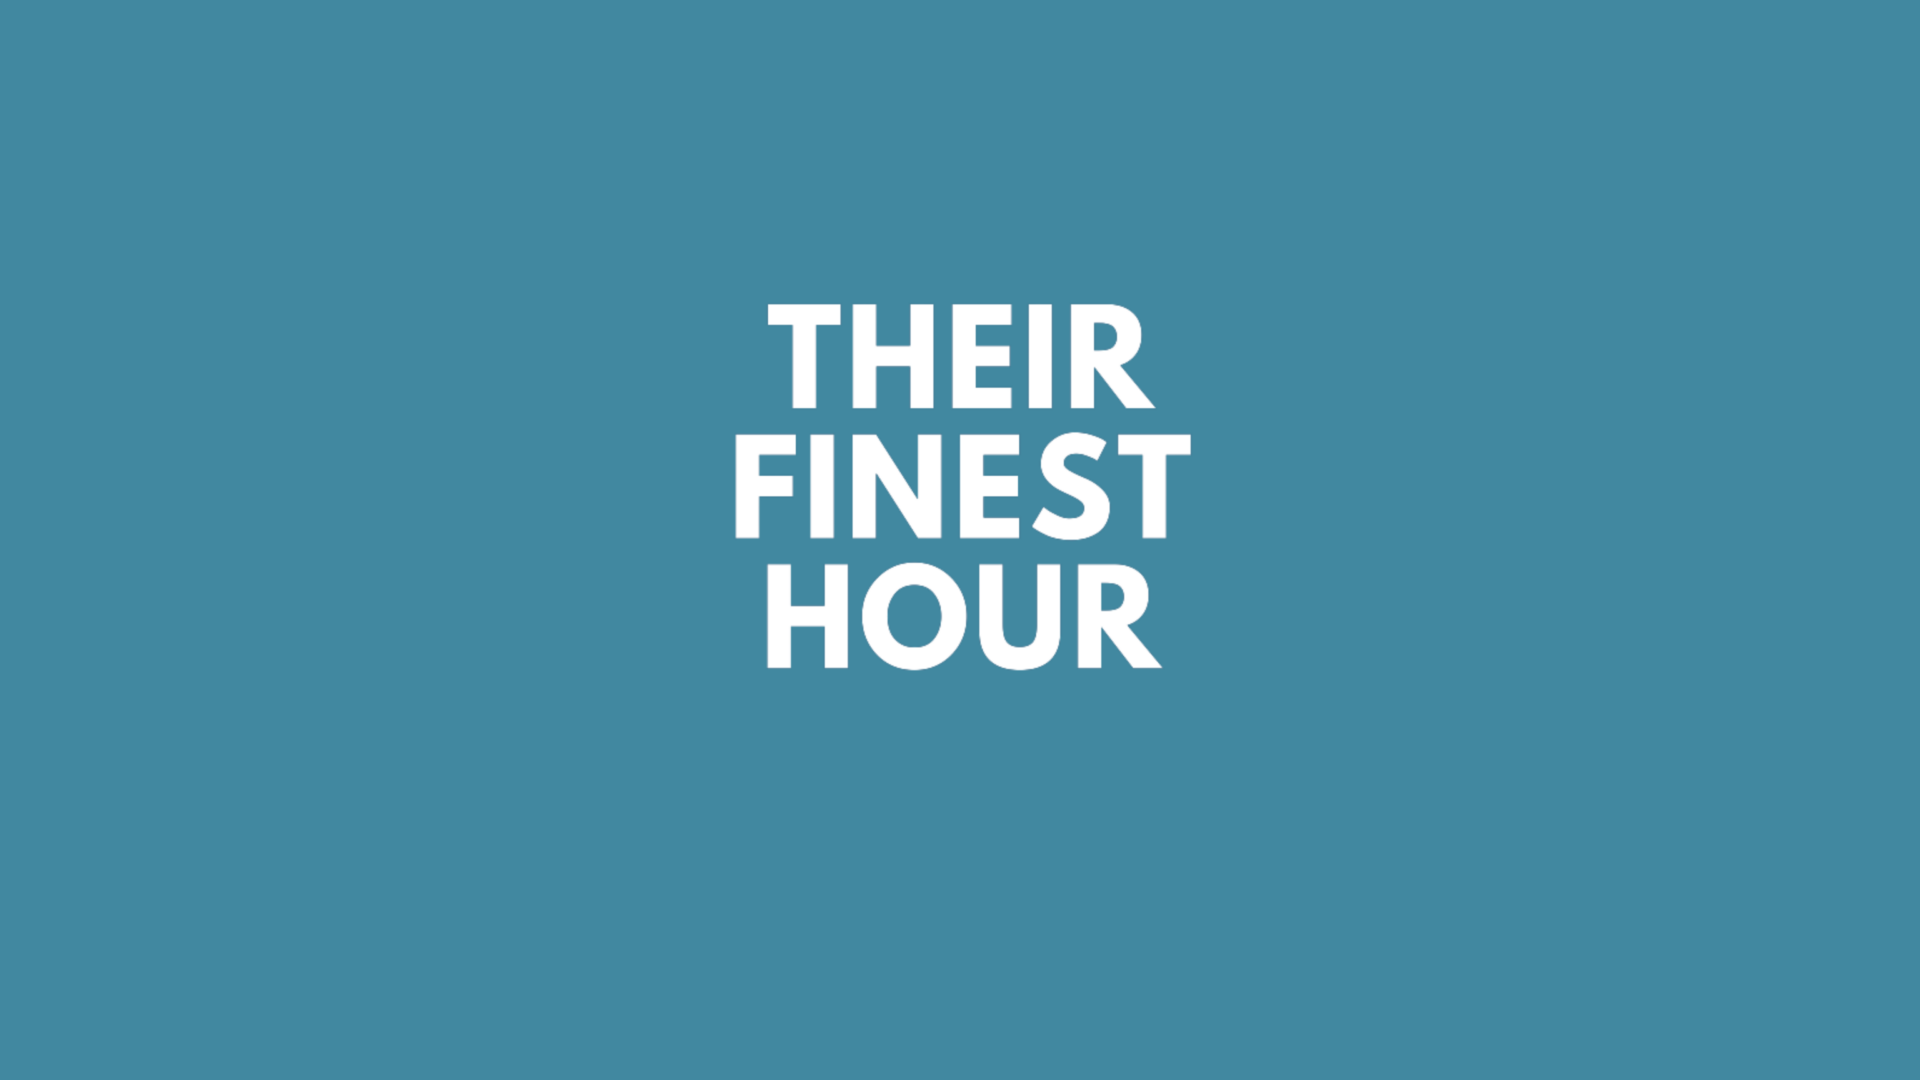 'Their Finest Hour' in white text on a blue background